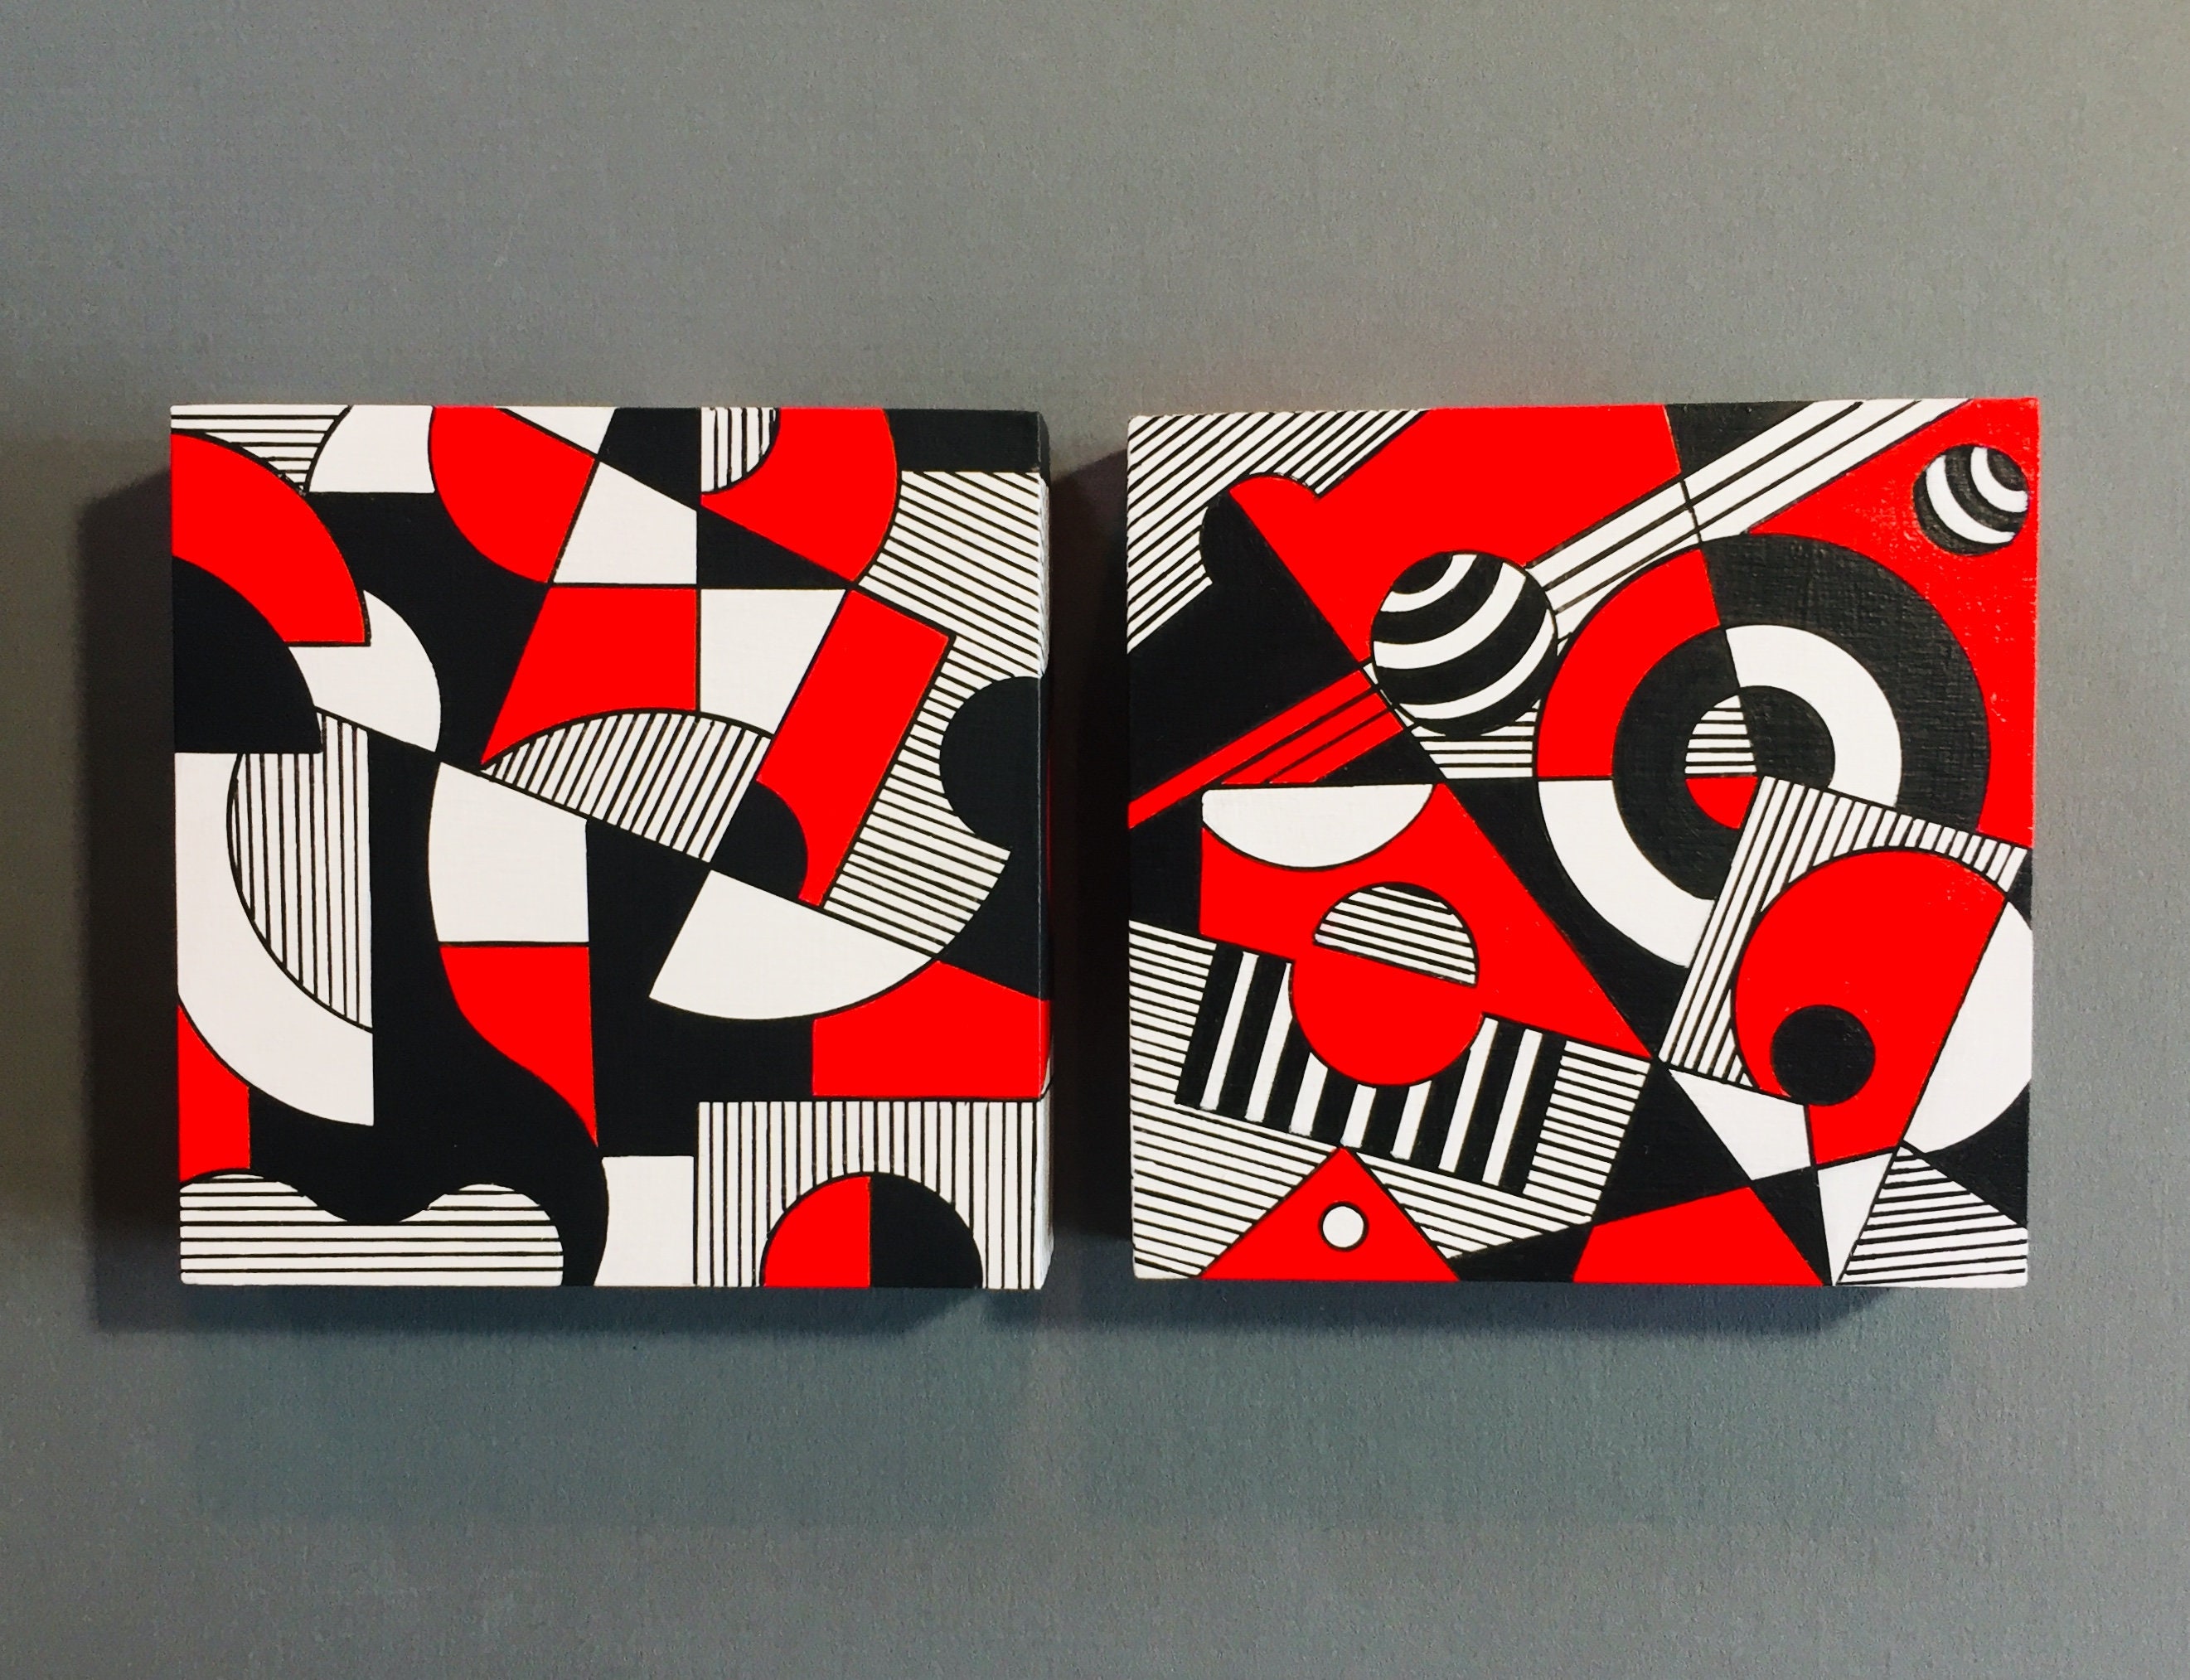 Set of 3 Paintings, Painting, Canvas, Abstract, Pattern, Geometric, Red,  Black, Square, Minimalist, Modern, Contemporary, Ethnic, Design 